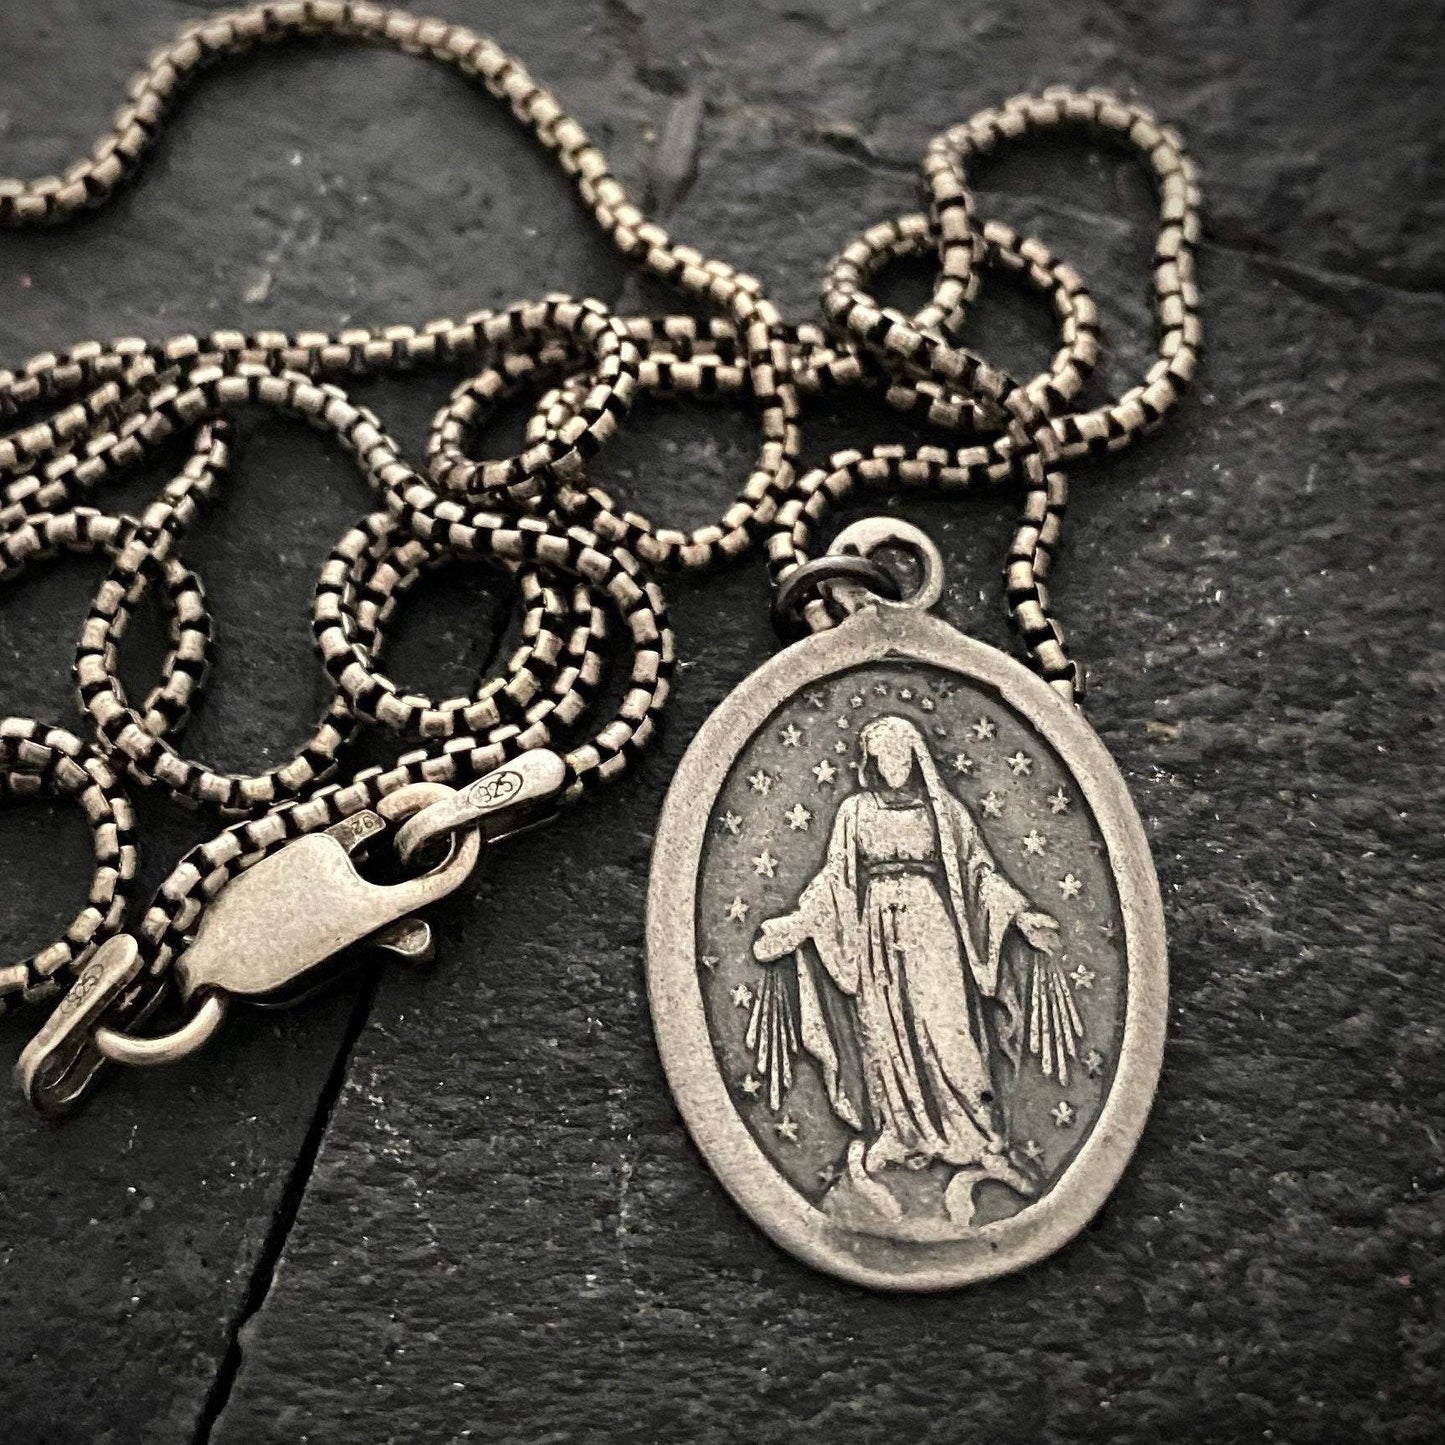 Mary Medal Sterling Silver Men's Necklace, Unisex Jewelry, Catholic Religious Gift, SS-007